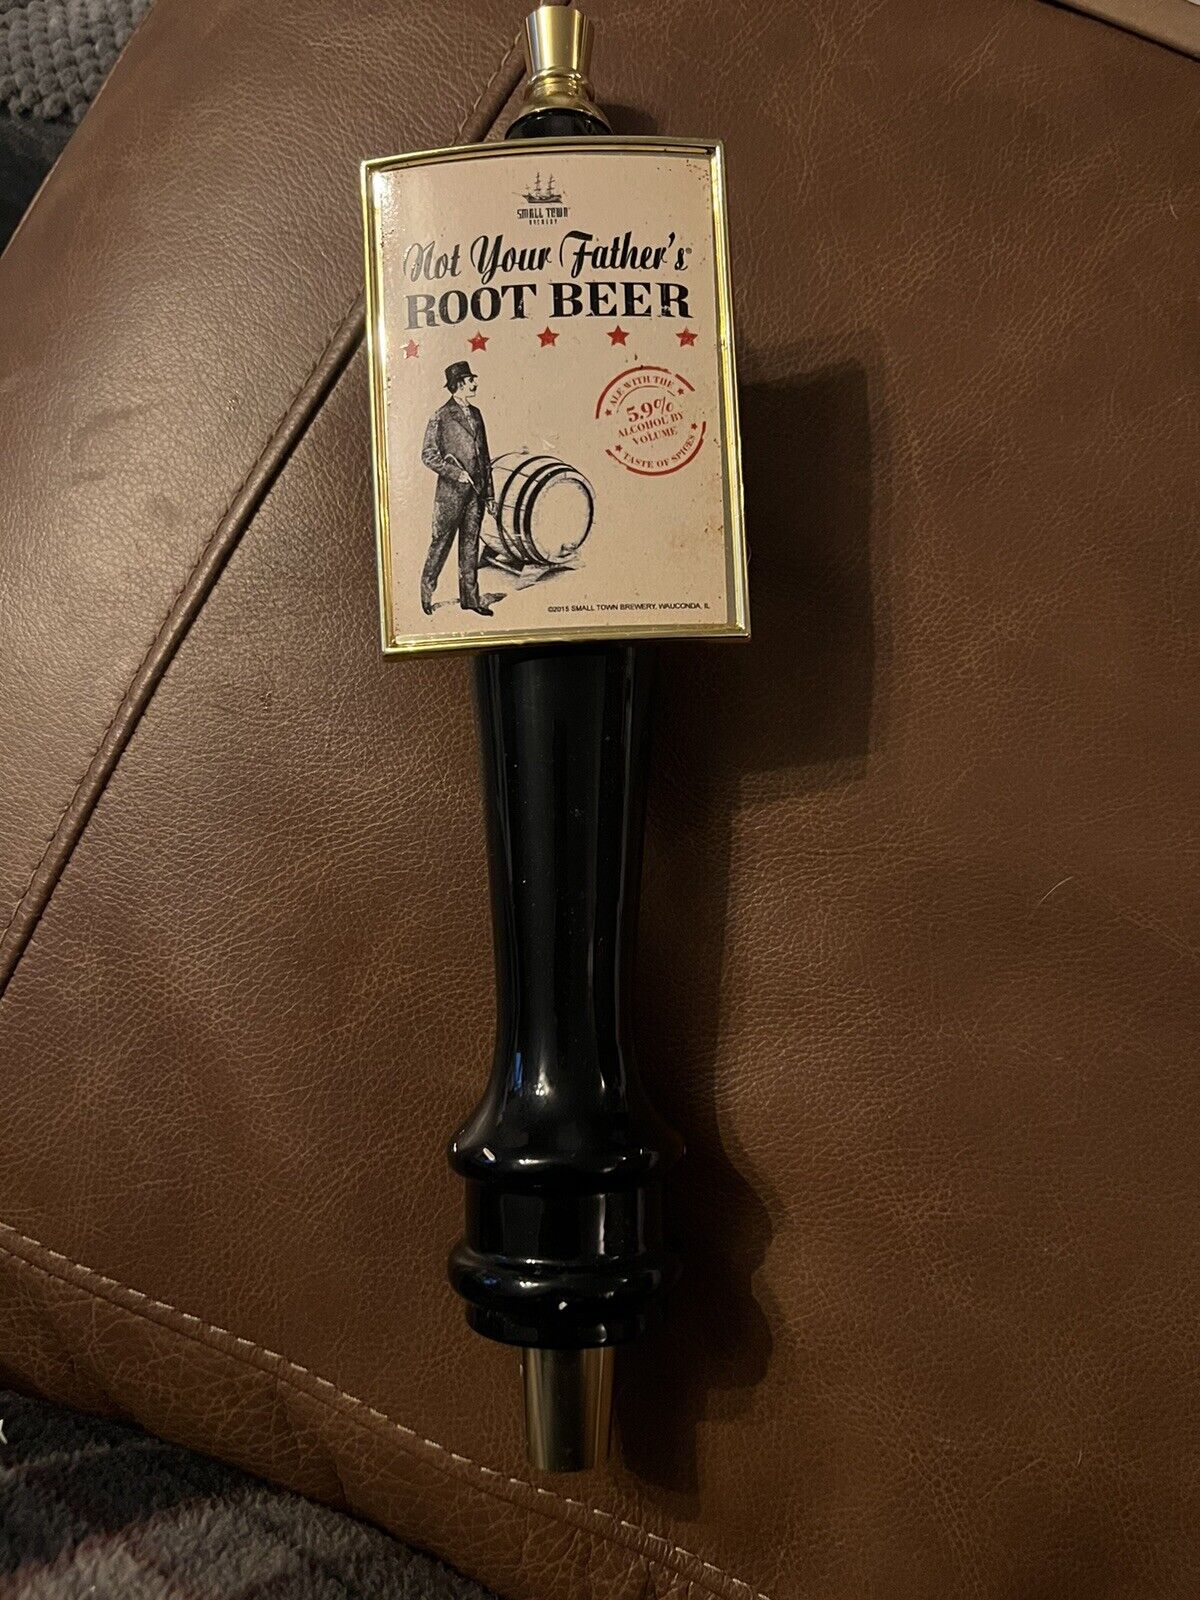 Not Your Father’s Root Beer Tap Handle Kmob 11.5” Small Town Brewery Bar Mancave